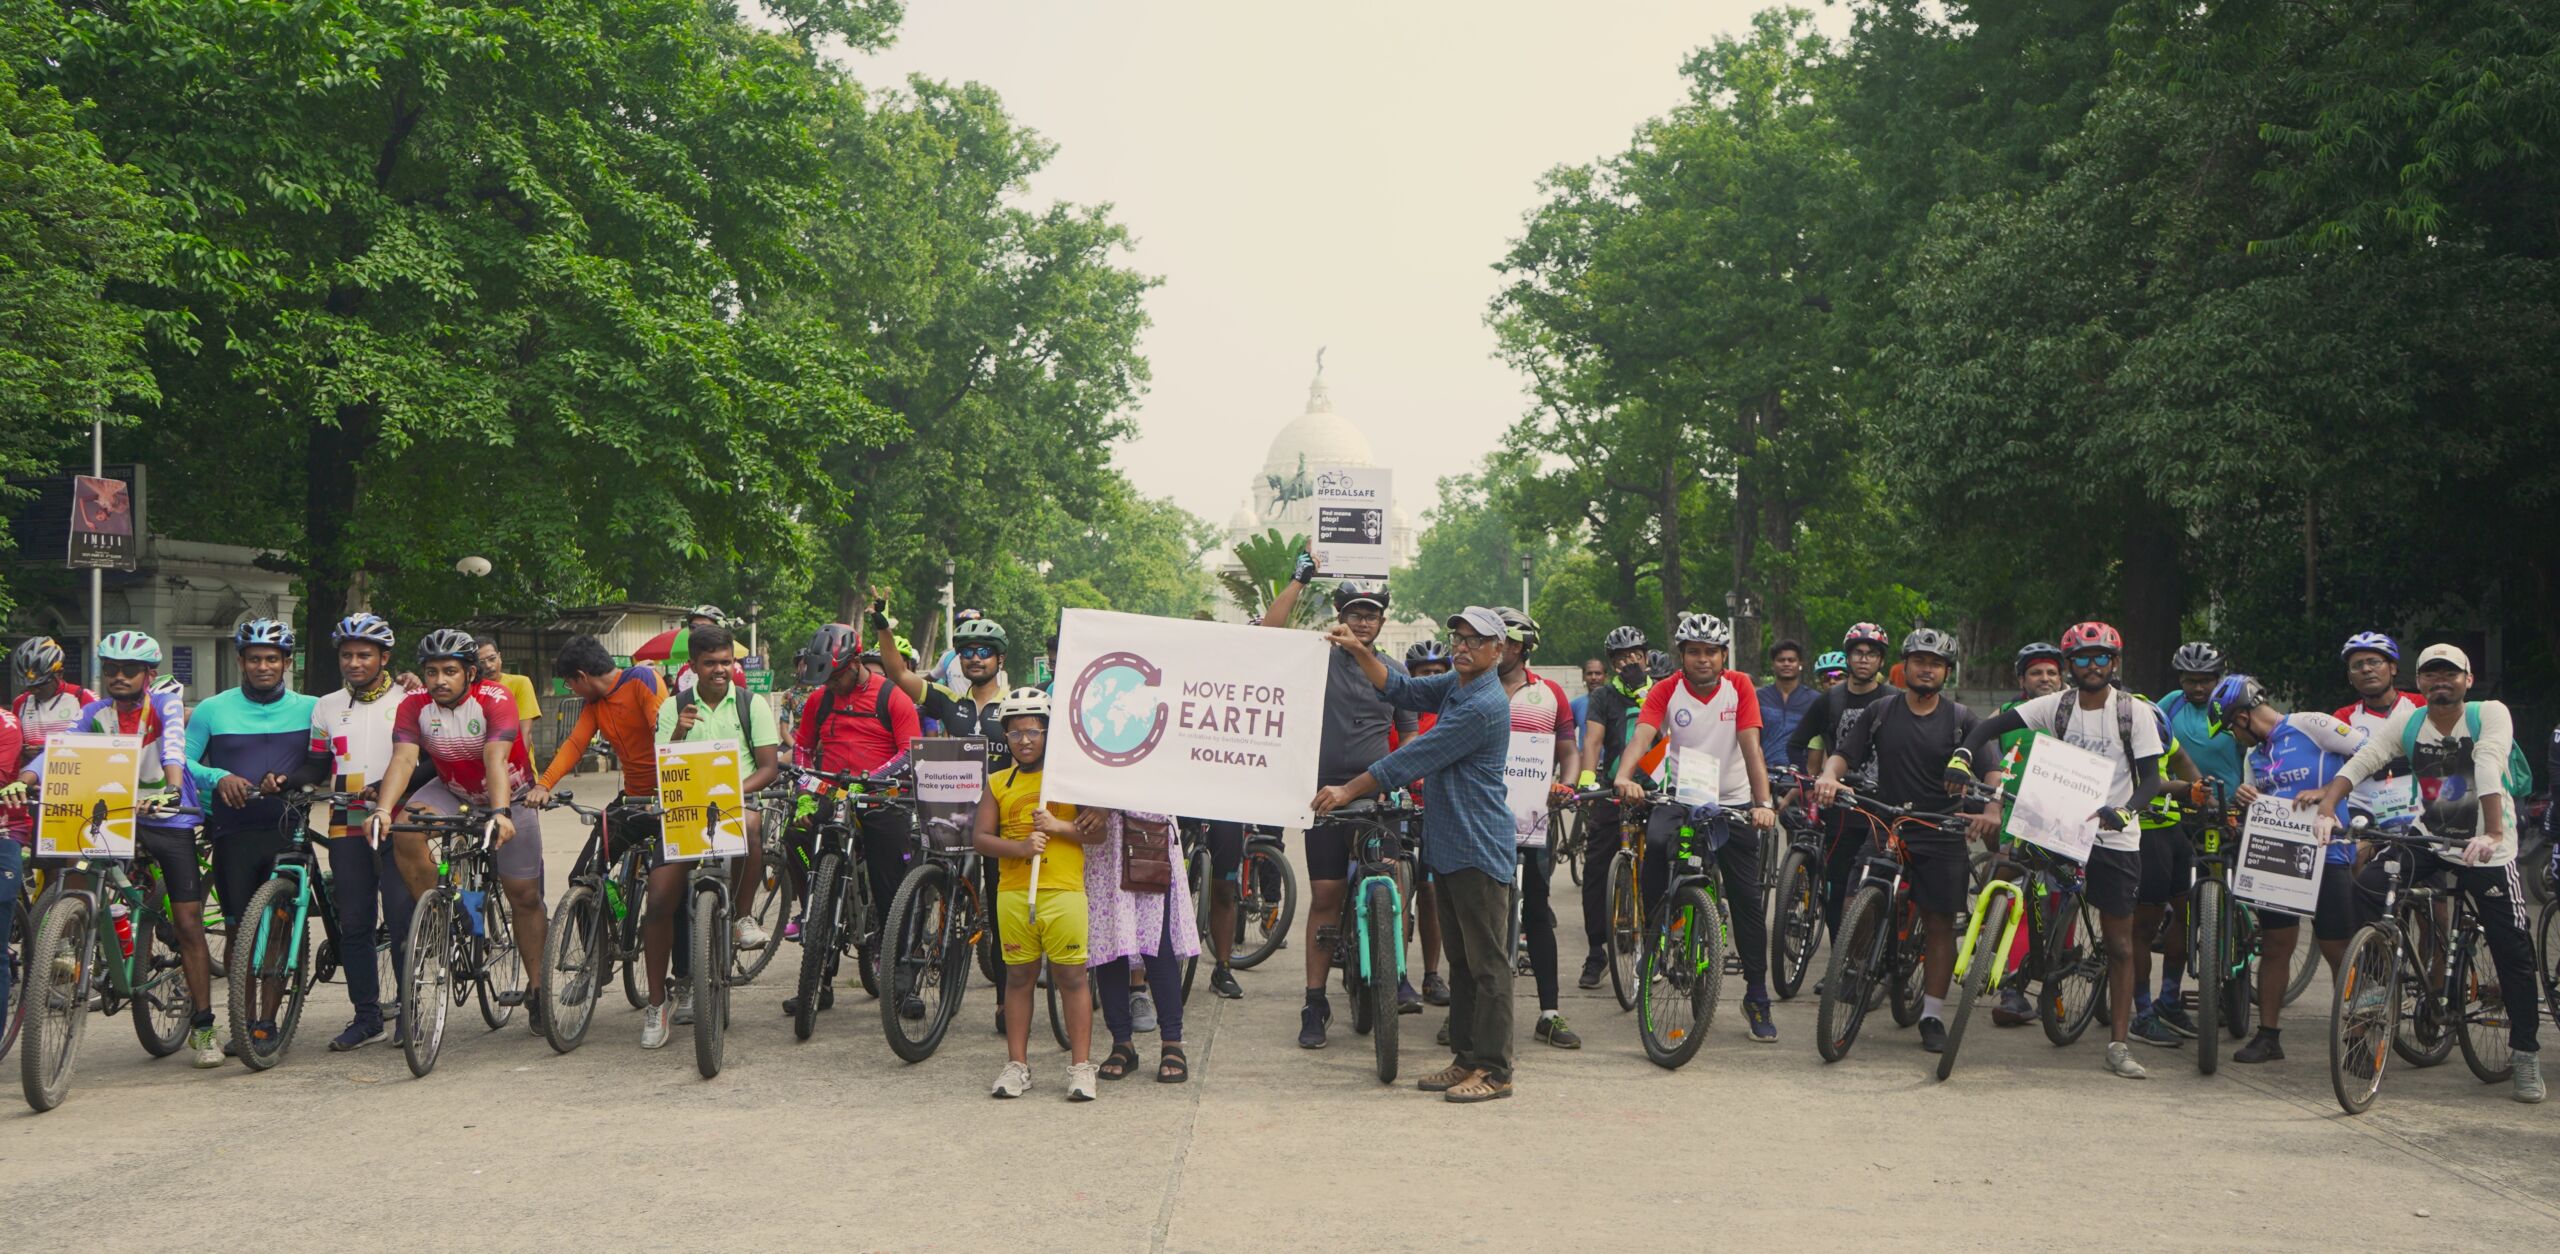 Move For Earth Global Cycle Ride: Pedaling Towards a Greener Tomorrow